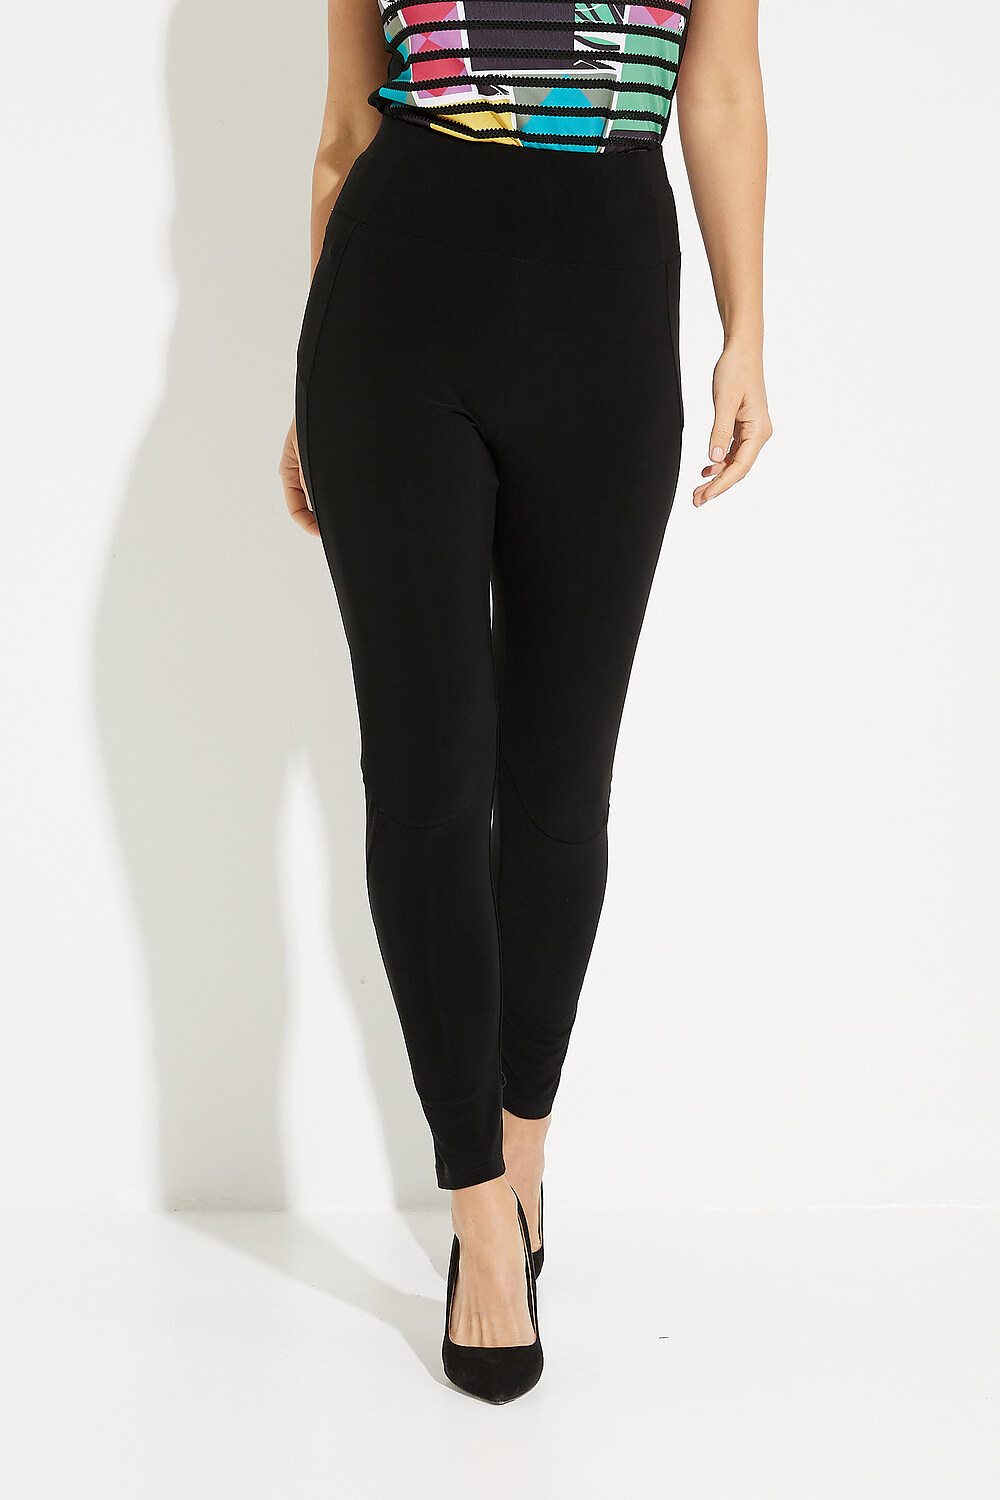 High-Waisted Clean Front Pants Style 231012. Black